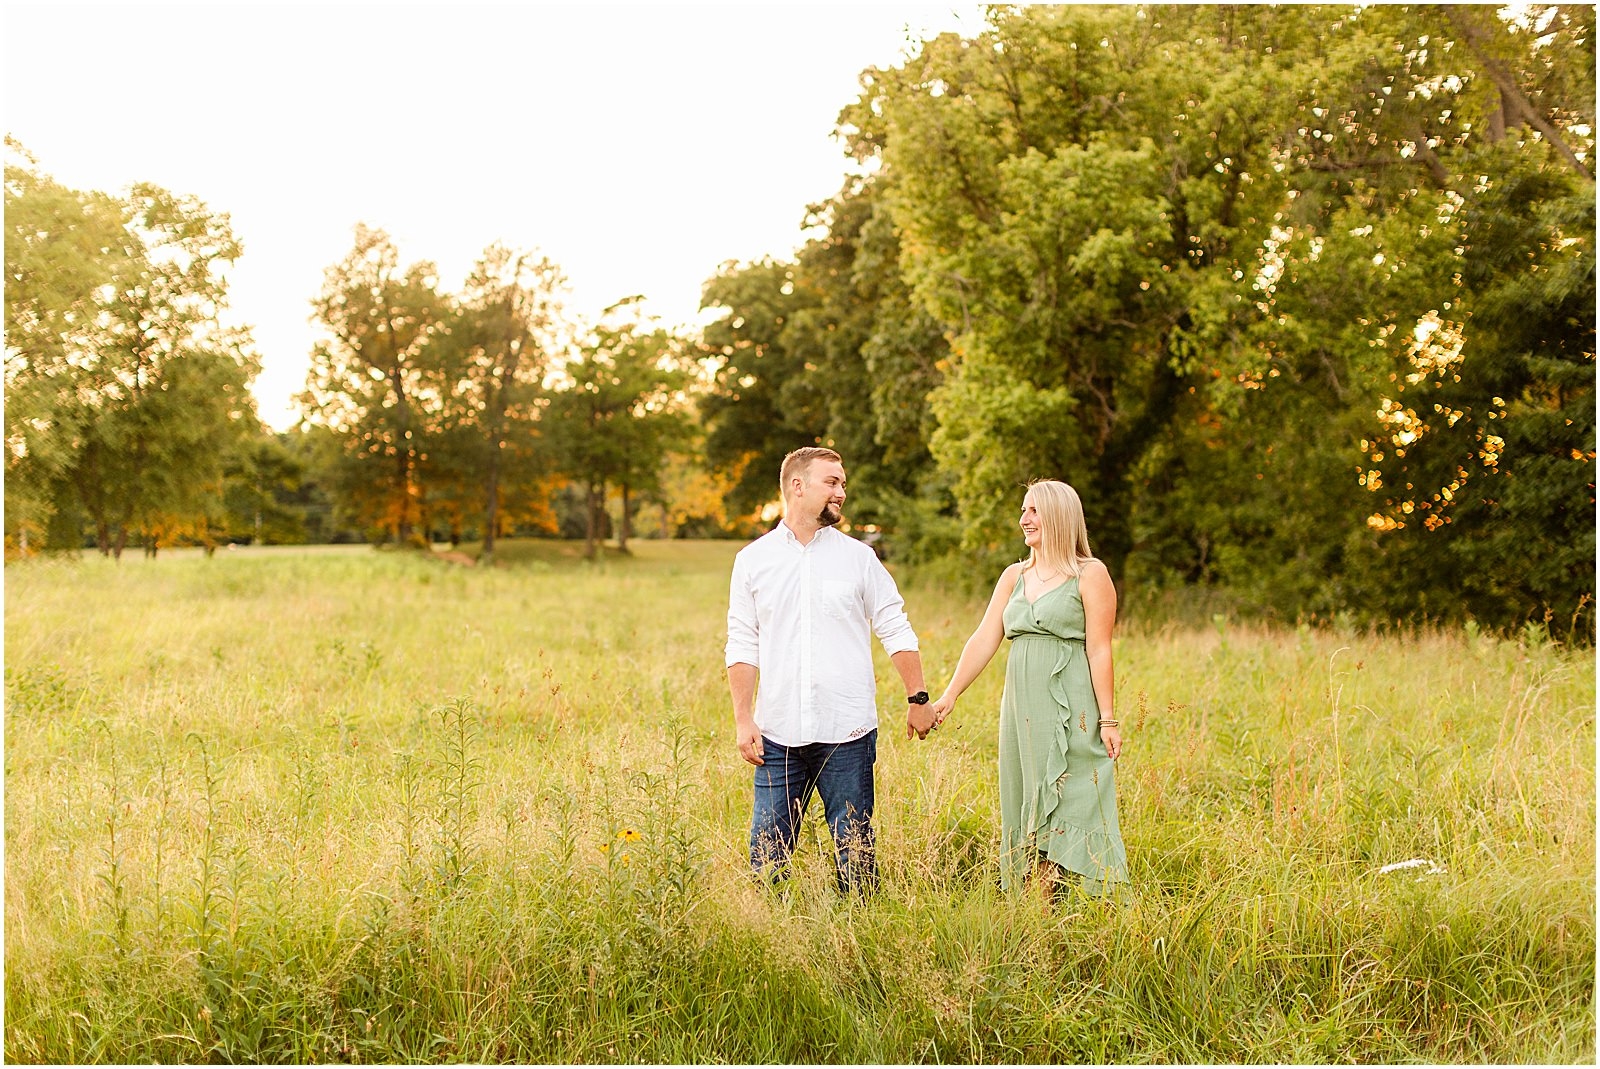 Evansville Family Maternity Photography by Bret and Brandie Owensboro Family Photographer Friedman Park